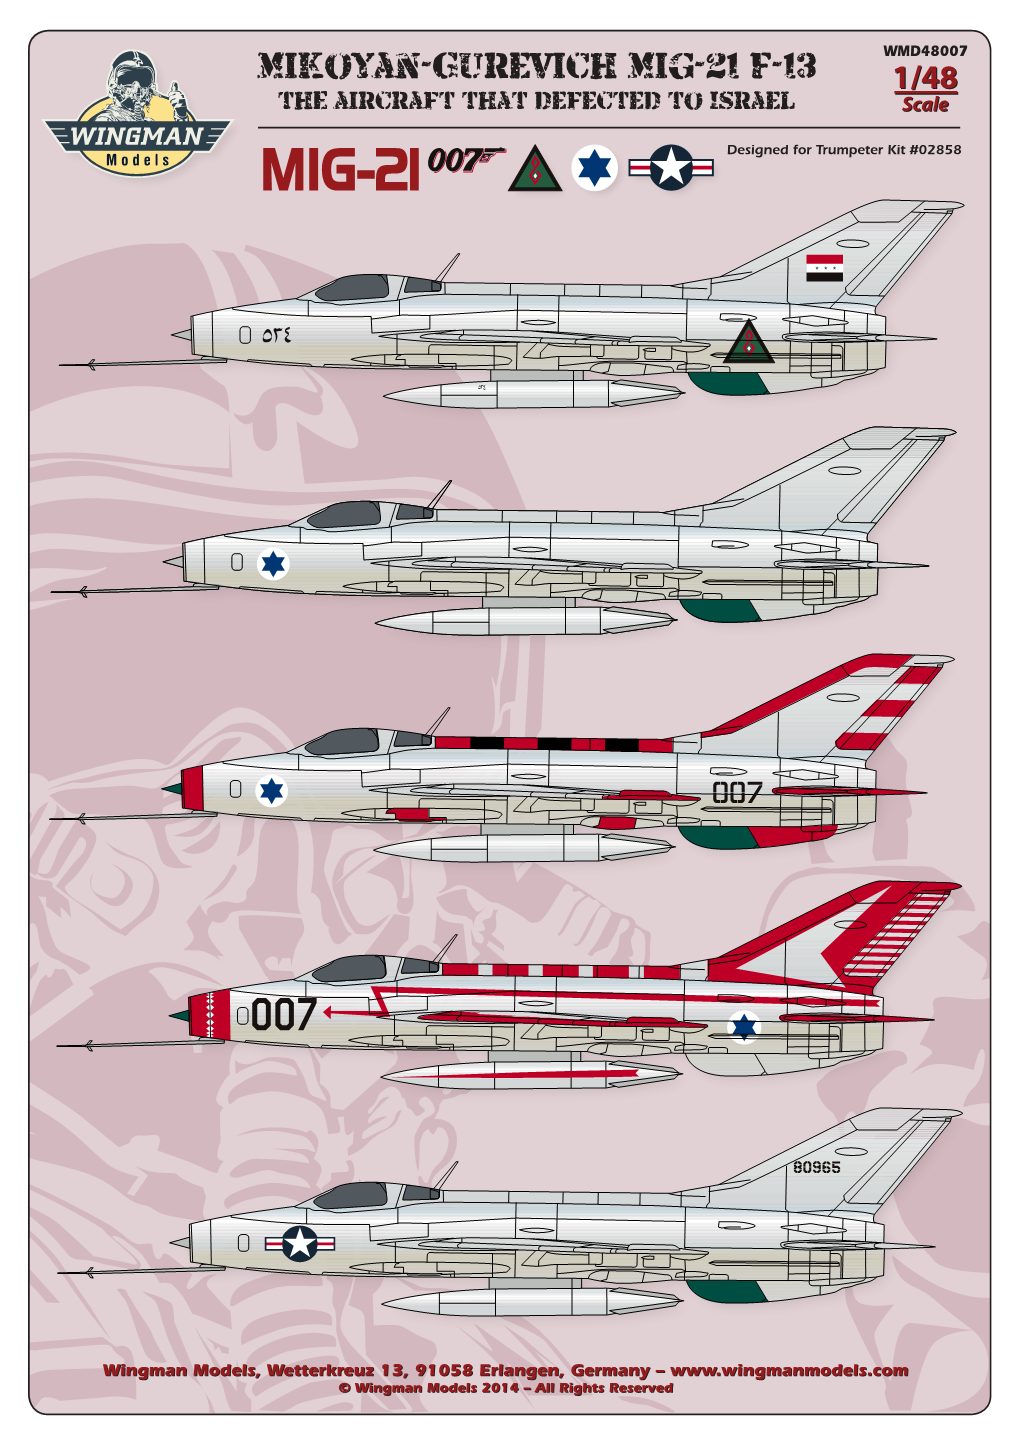 Mig-21 F-13 WMD48007 the Aircraft That Defected to Israel MIG-21 Designed for Trumpeter Kit #02858